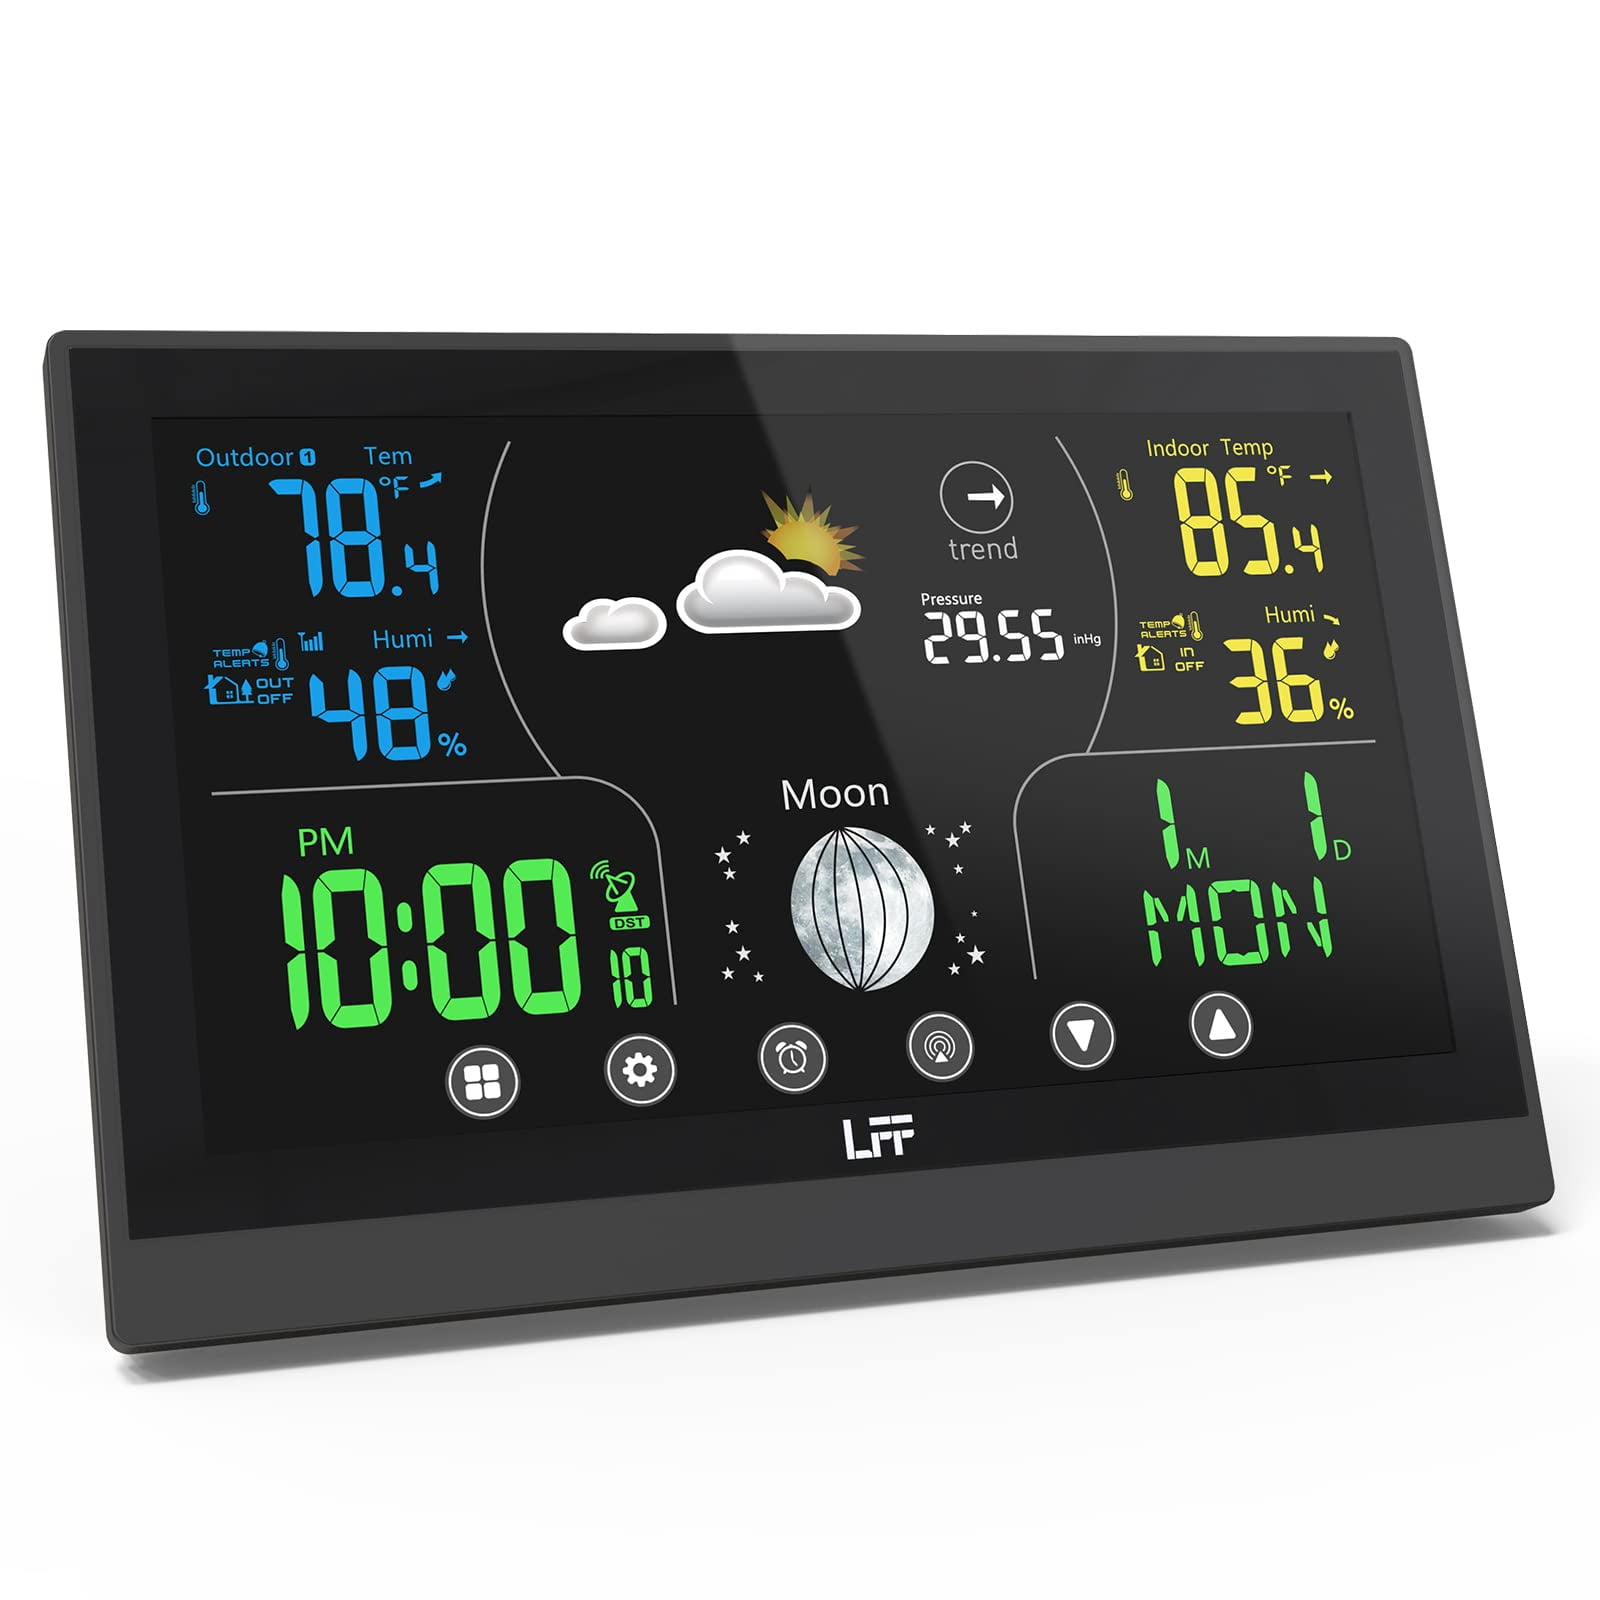 LFF Weather Stations, Wireless Indoor Outdoor Thermometer, Color Display Digital Weather Station with Atomic Clock, Forecast Station and Calendar